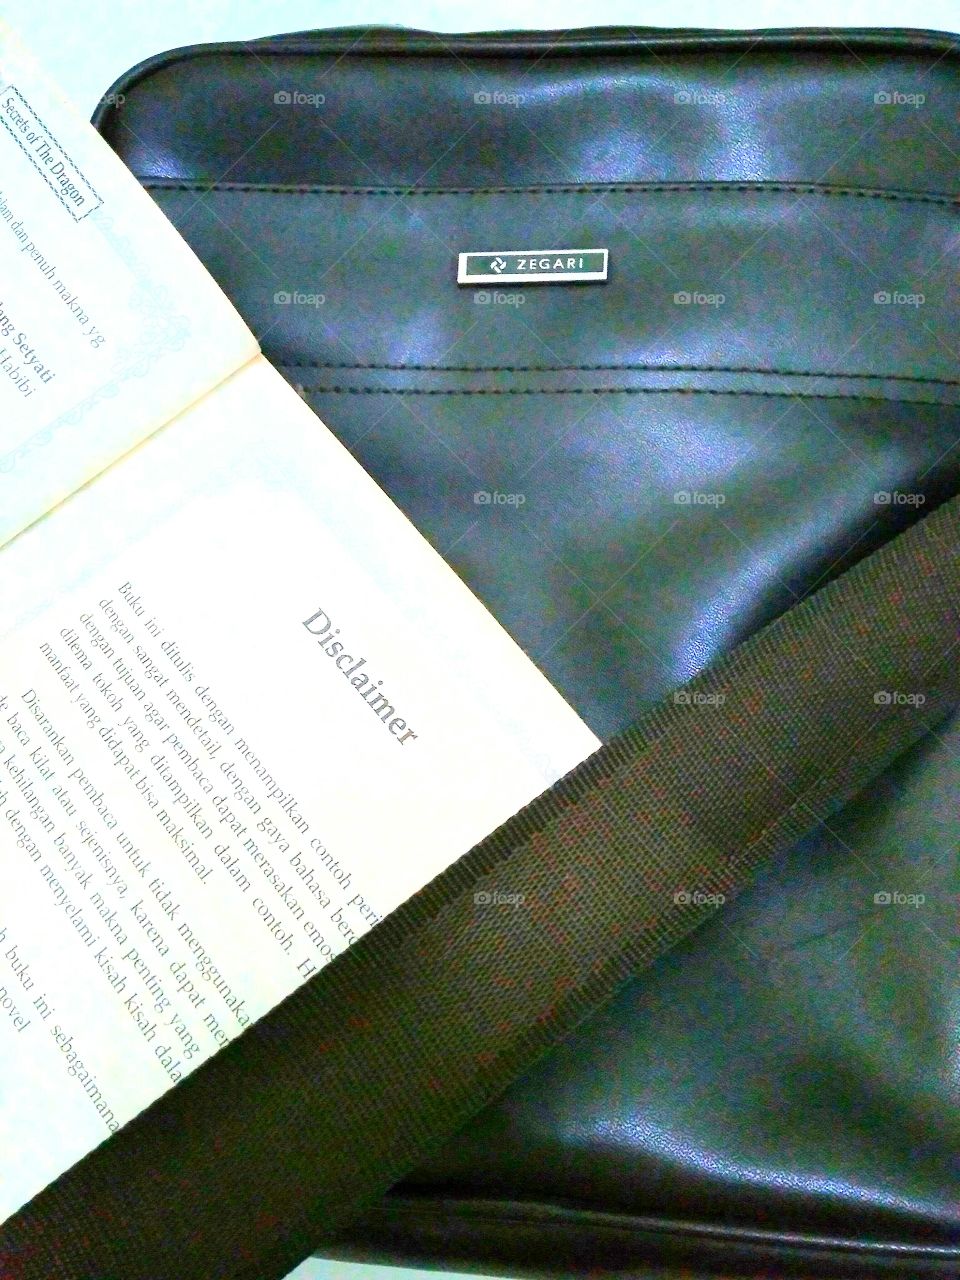 Bag and book